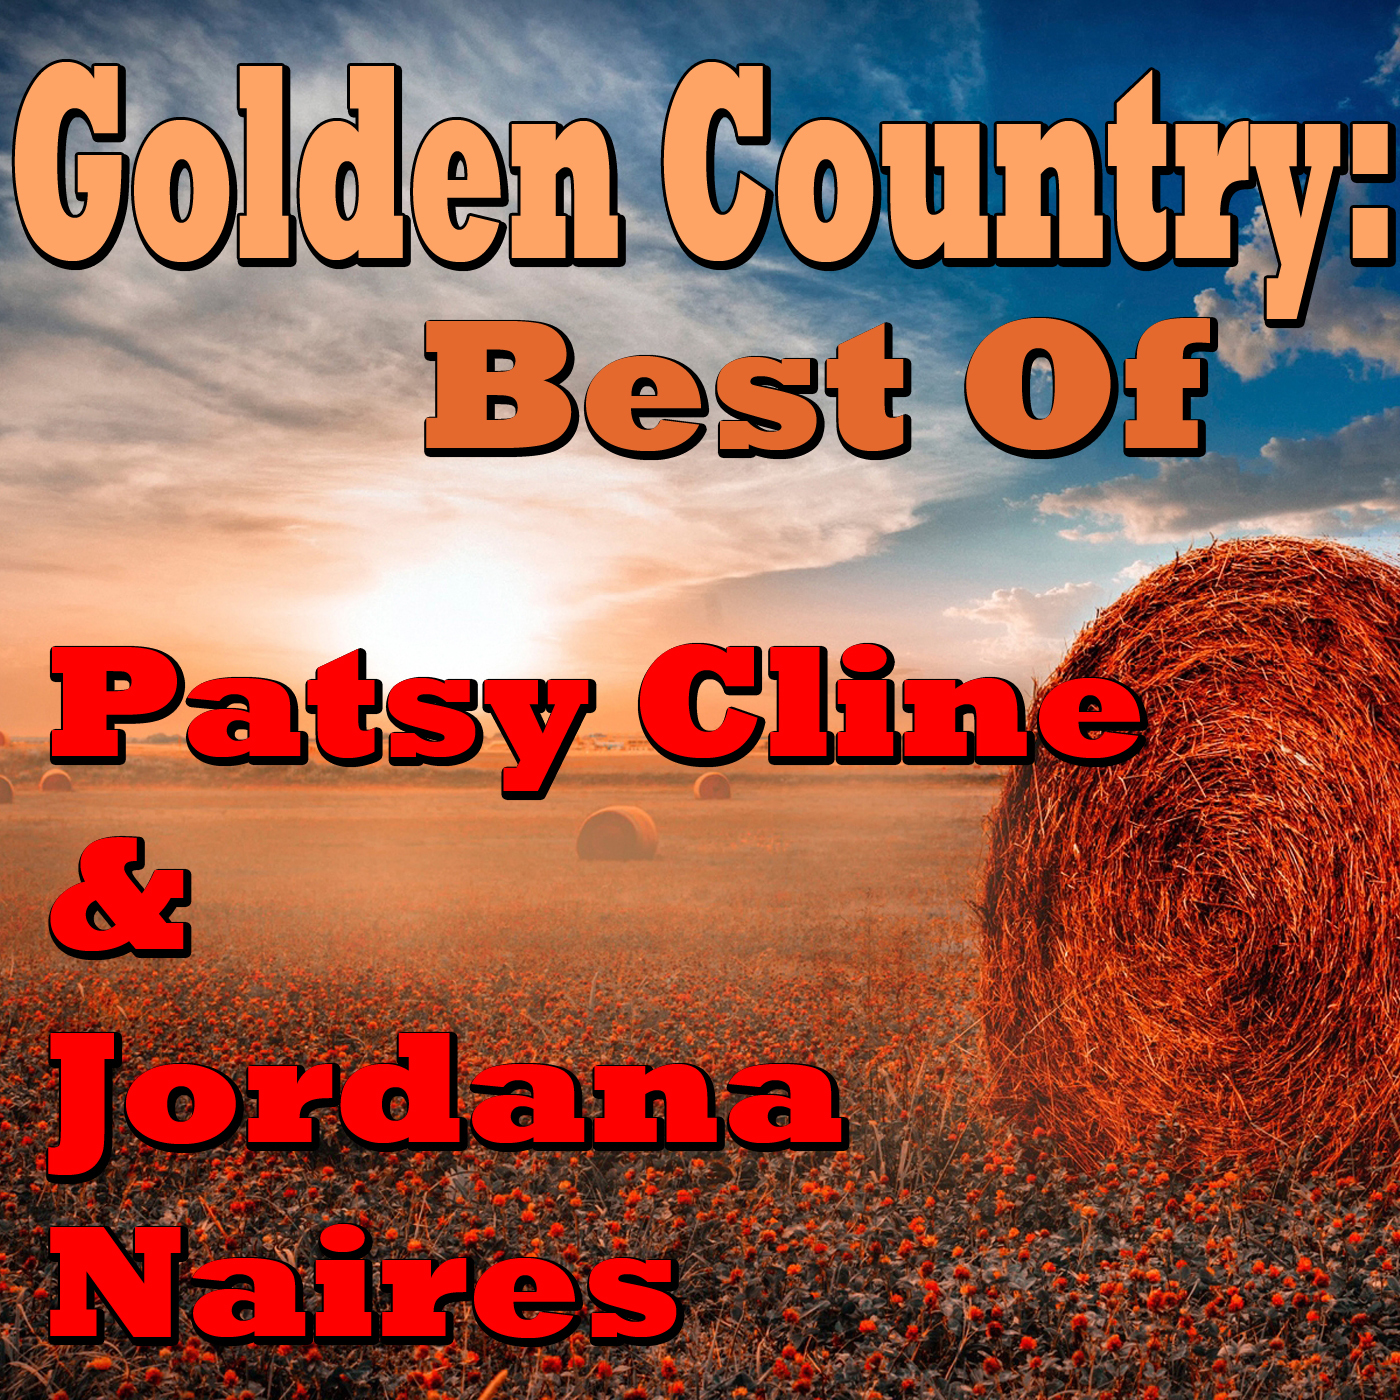 Golden Country: Best Of Patsy Cline & Jordana Naires